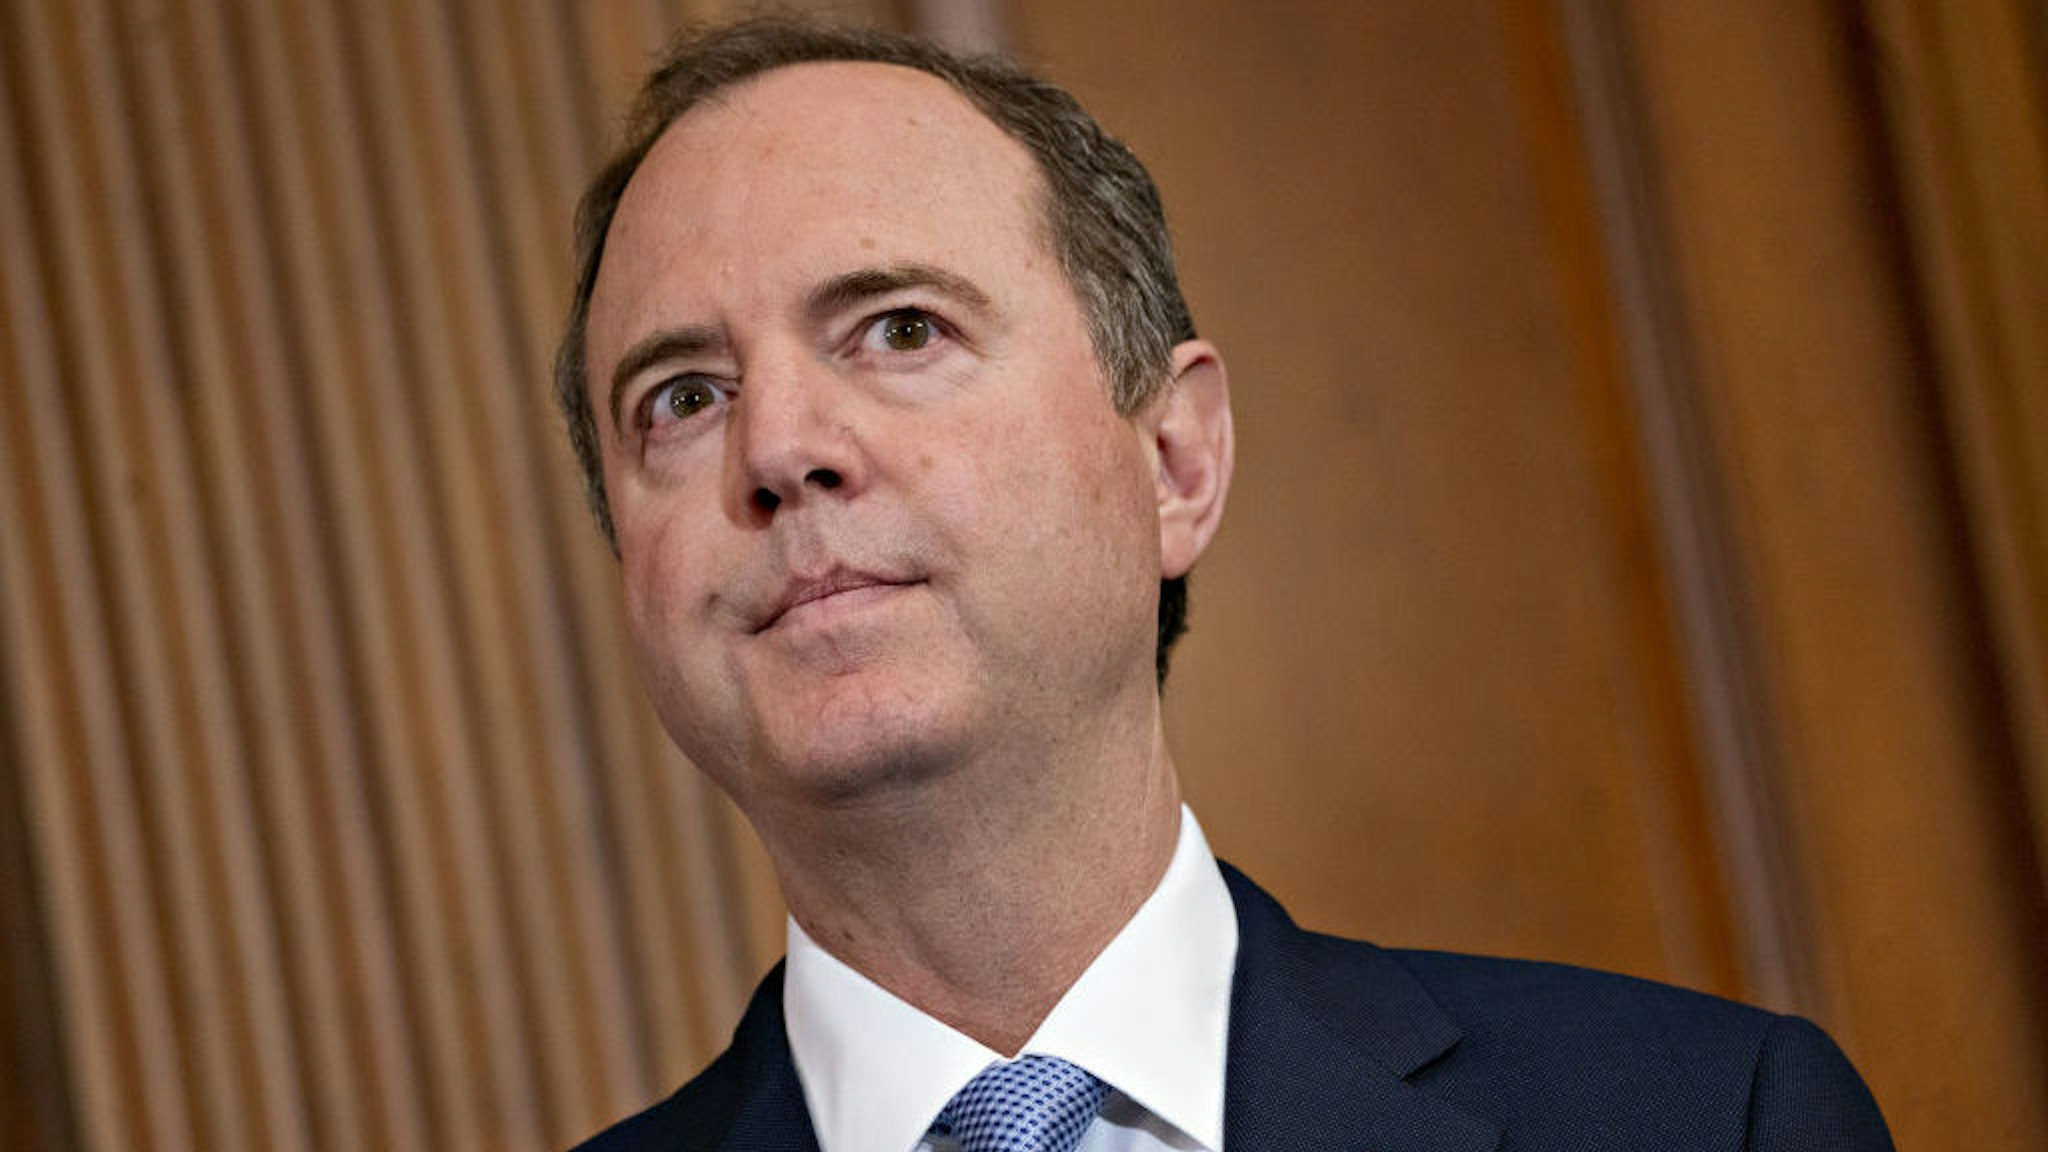 Representative Adam Schiff, a Democrat from California and chairman of the House Intelligence Committee, listens during a news conference announcing the next steps in the impeachment inquiry at the U.S. Capitol in Washington, D.C., U.S., on Tuesday, Dec. 10, 2019. House Democrats unveiled two articles of impeachment against President Donald Trump, one on abuse of power and the other involving obstruction of Congress. Photographer: Andrew Harrer/Bloomberg